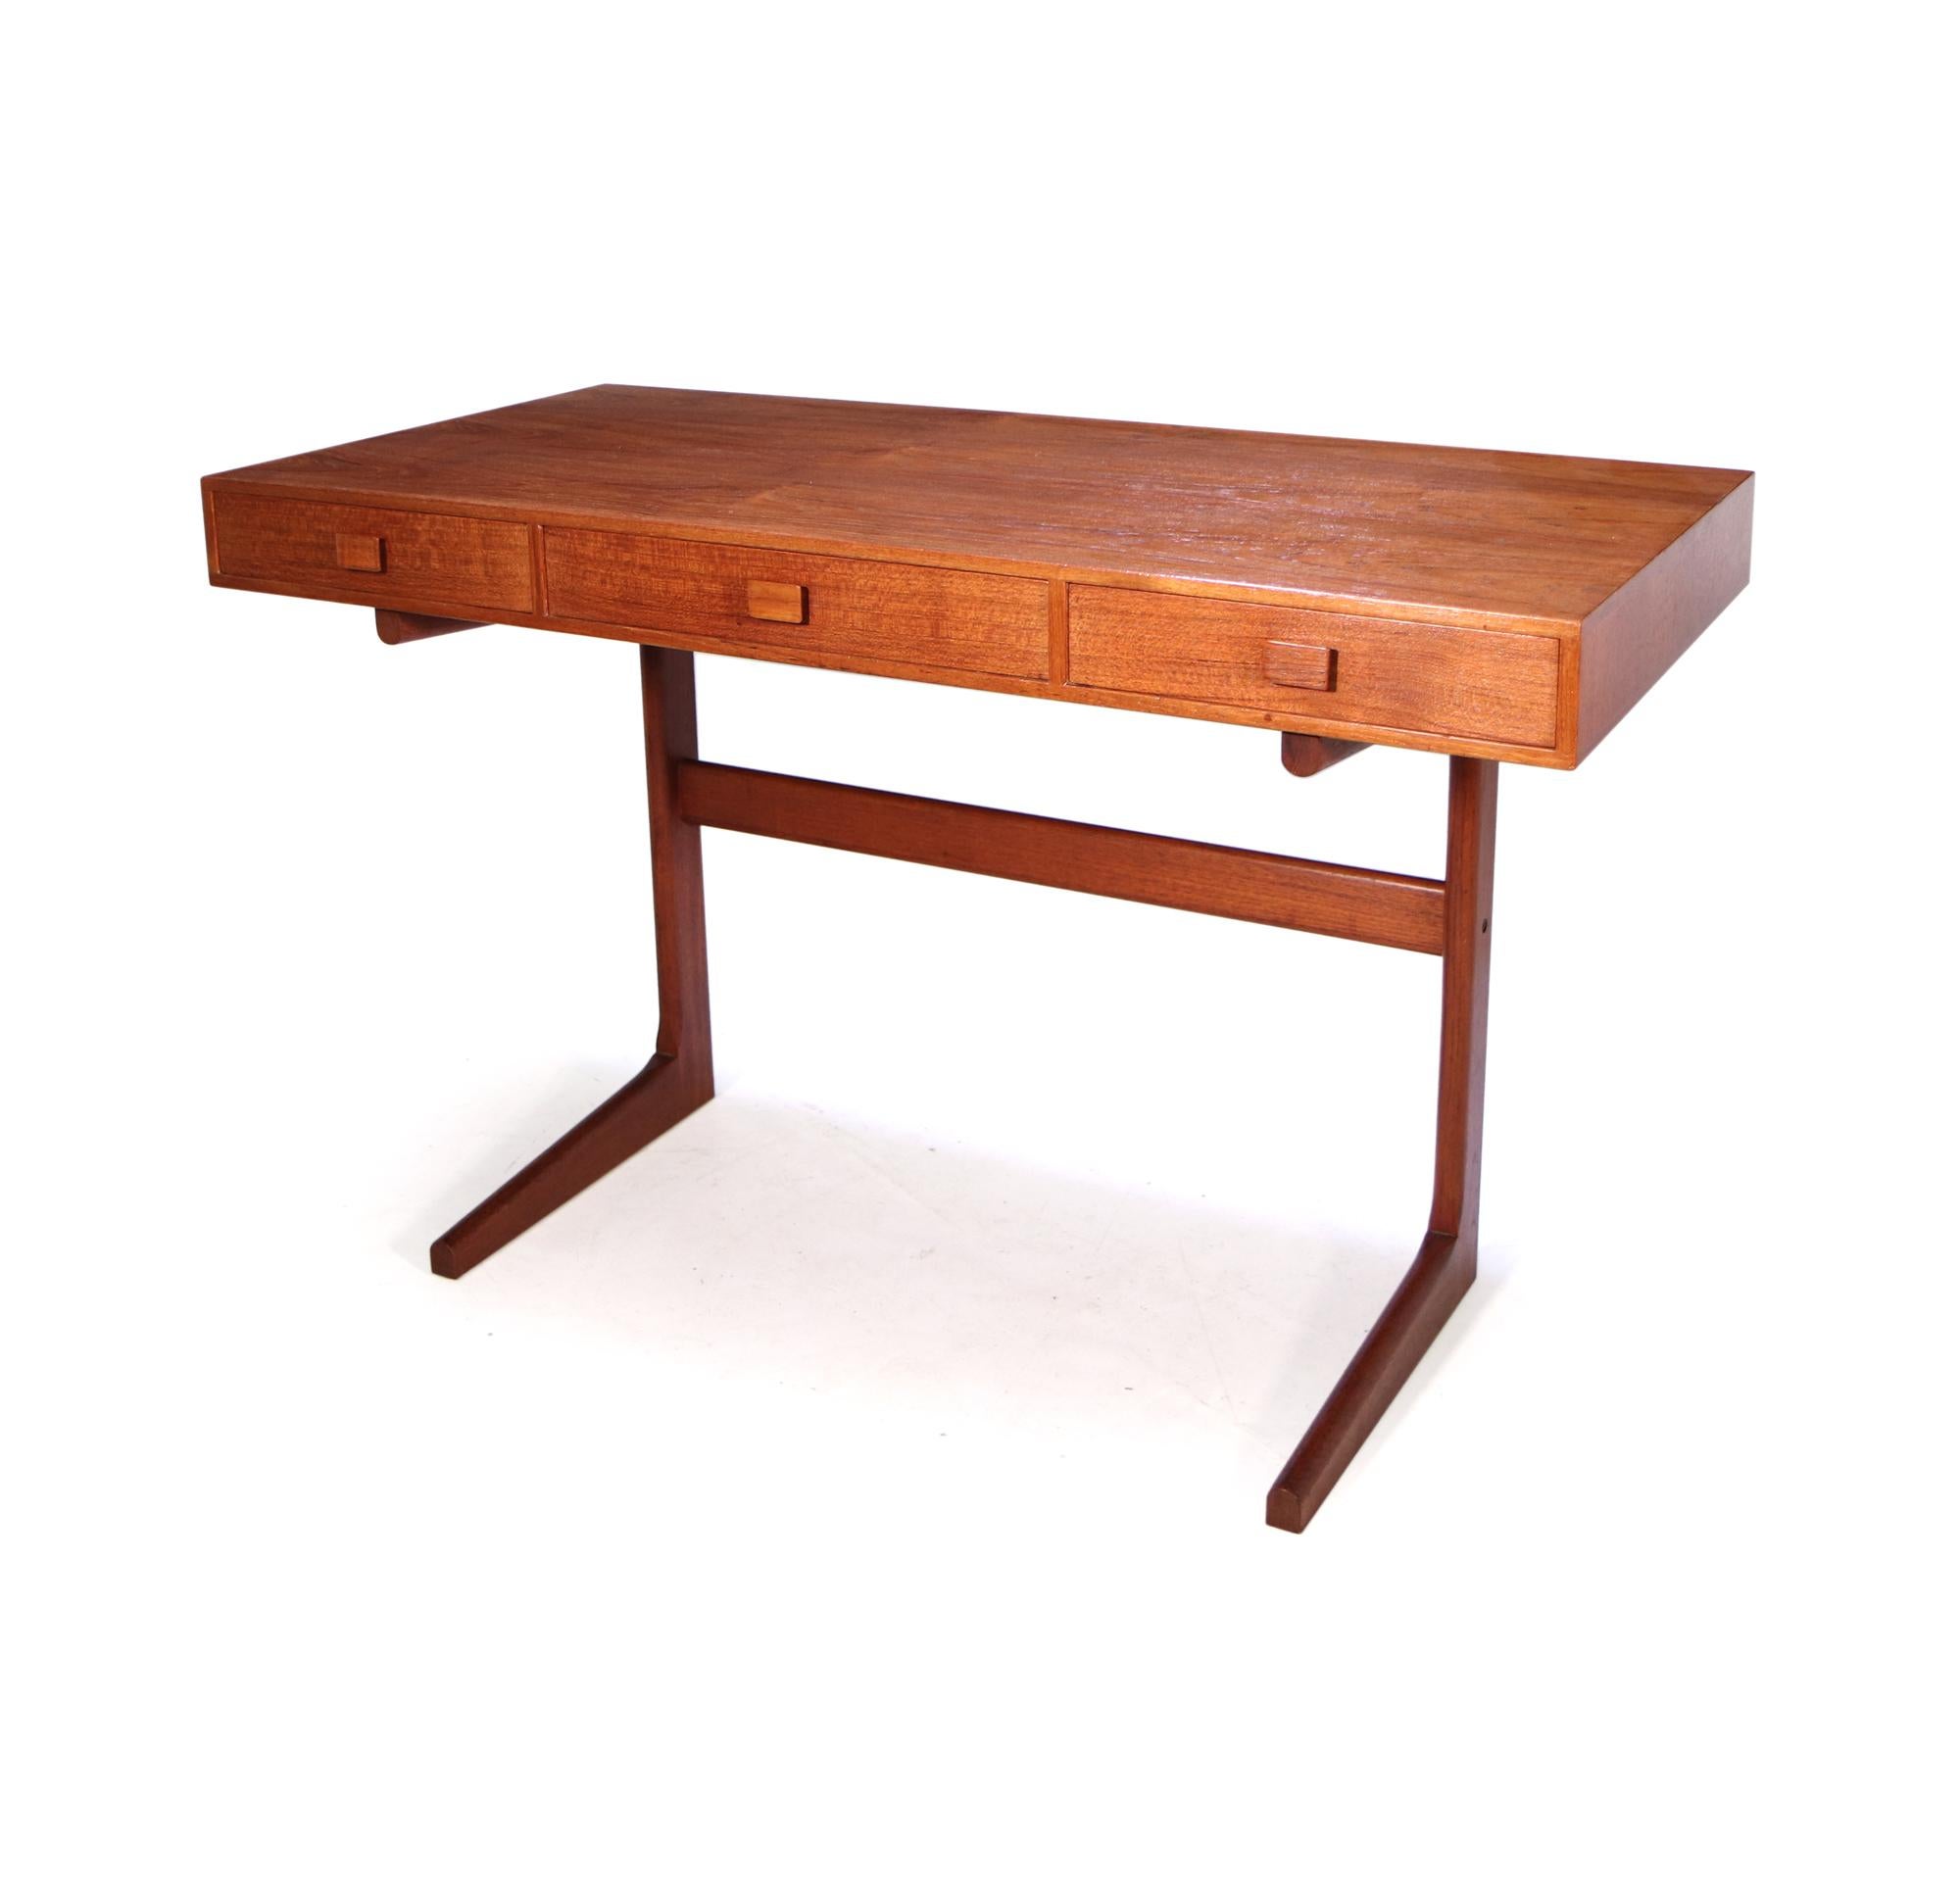 A mid century desk designed and produced in Denmark in the 1960’s by Georg Petersons, minimal sleek design with good colour and patination to the desk, three drawers with original square teak handles the teak leg frame provides a spacious kneehole.